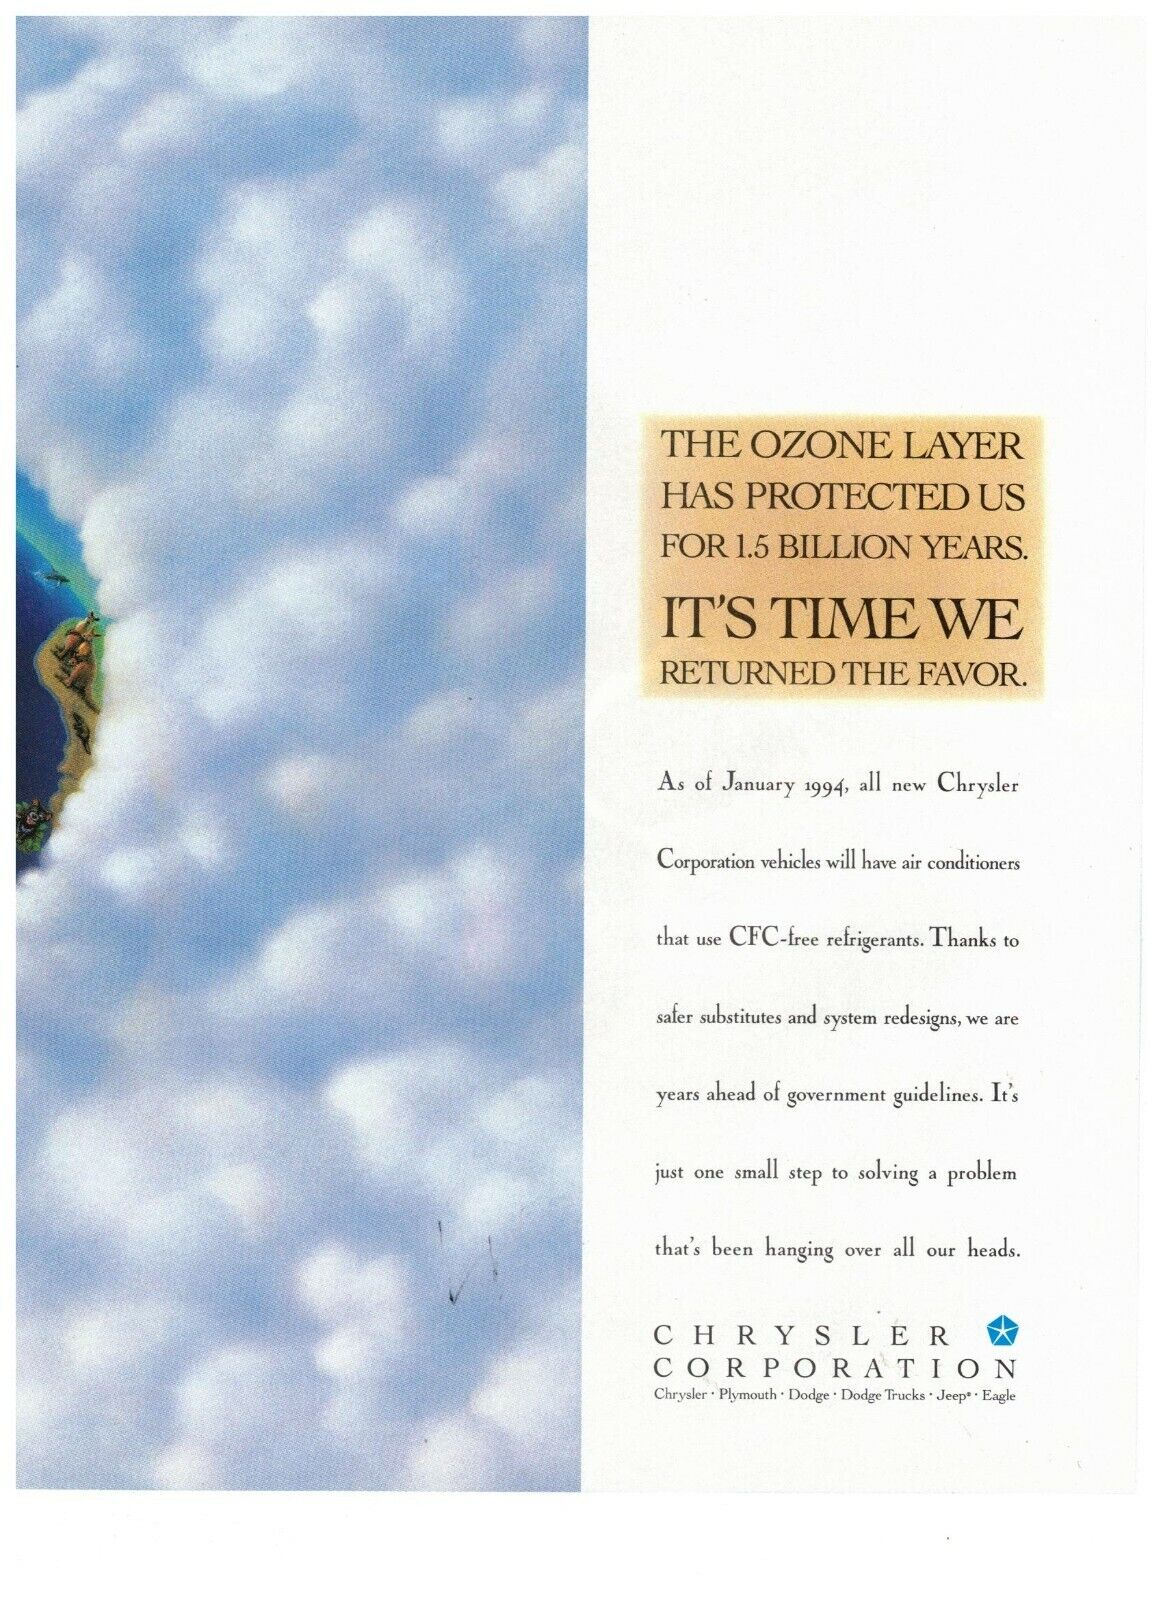 Chrysler Corporation Ozone Layer Cloud Cover Vintage 1995 Print Ad